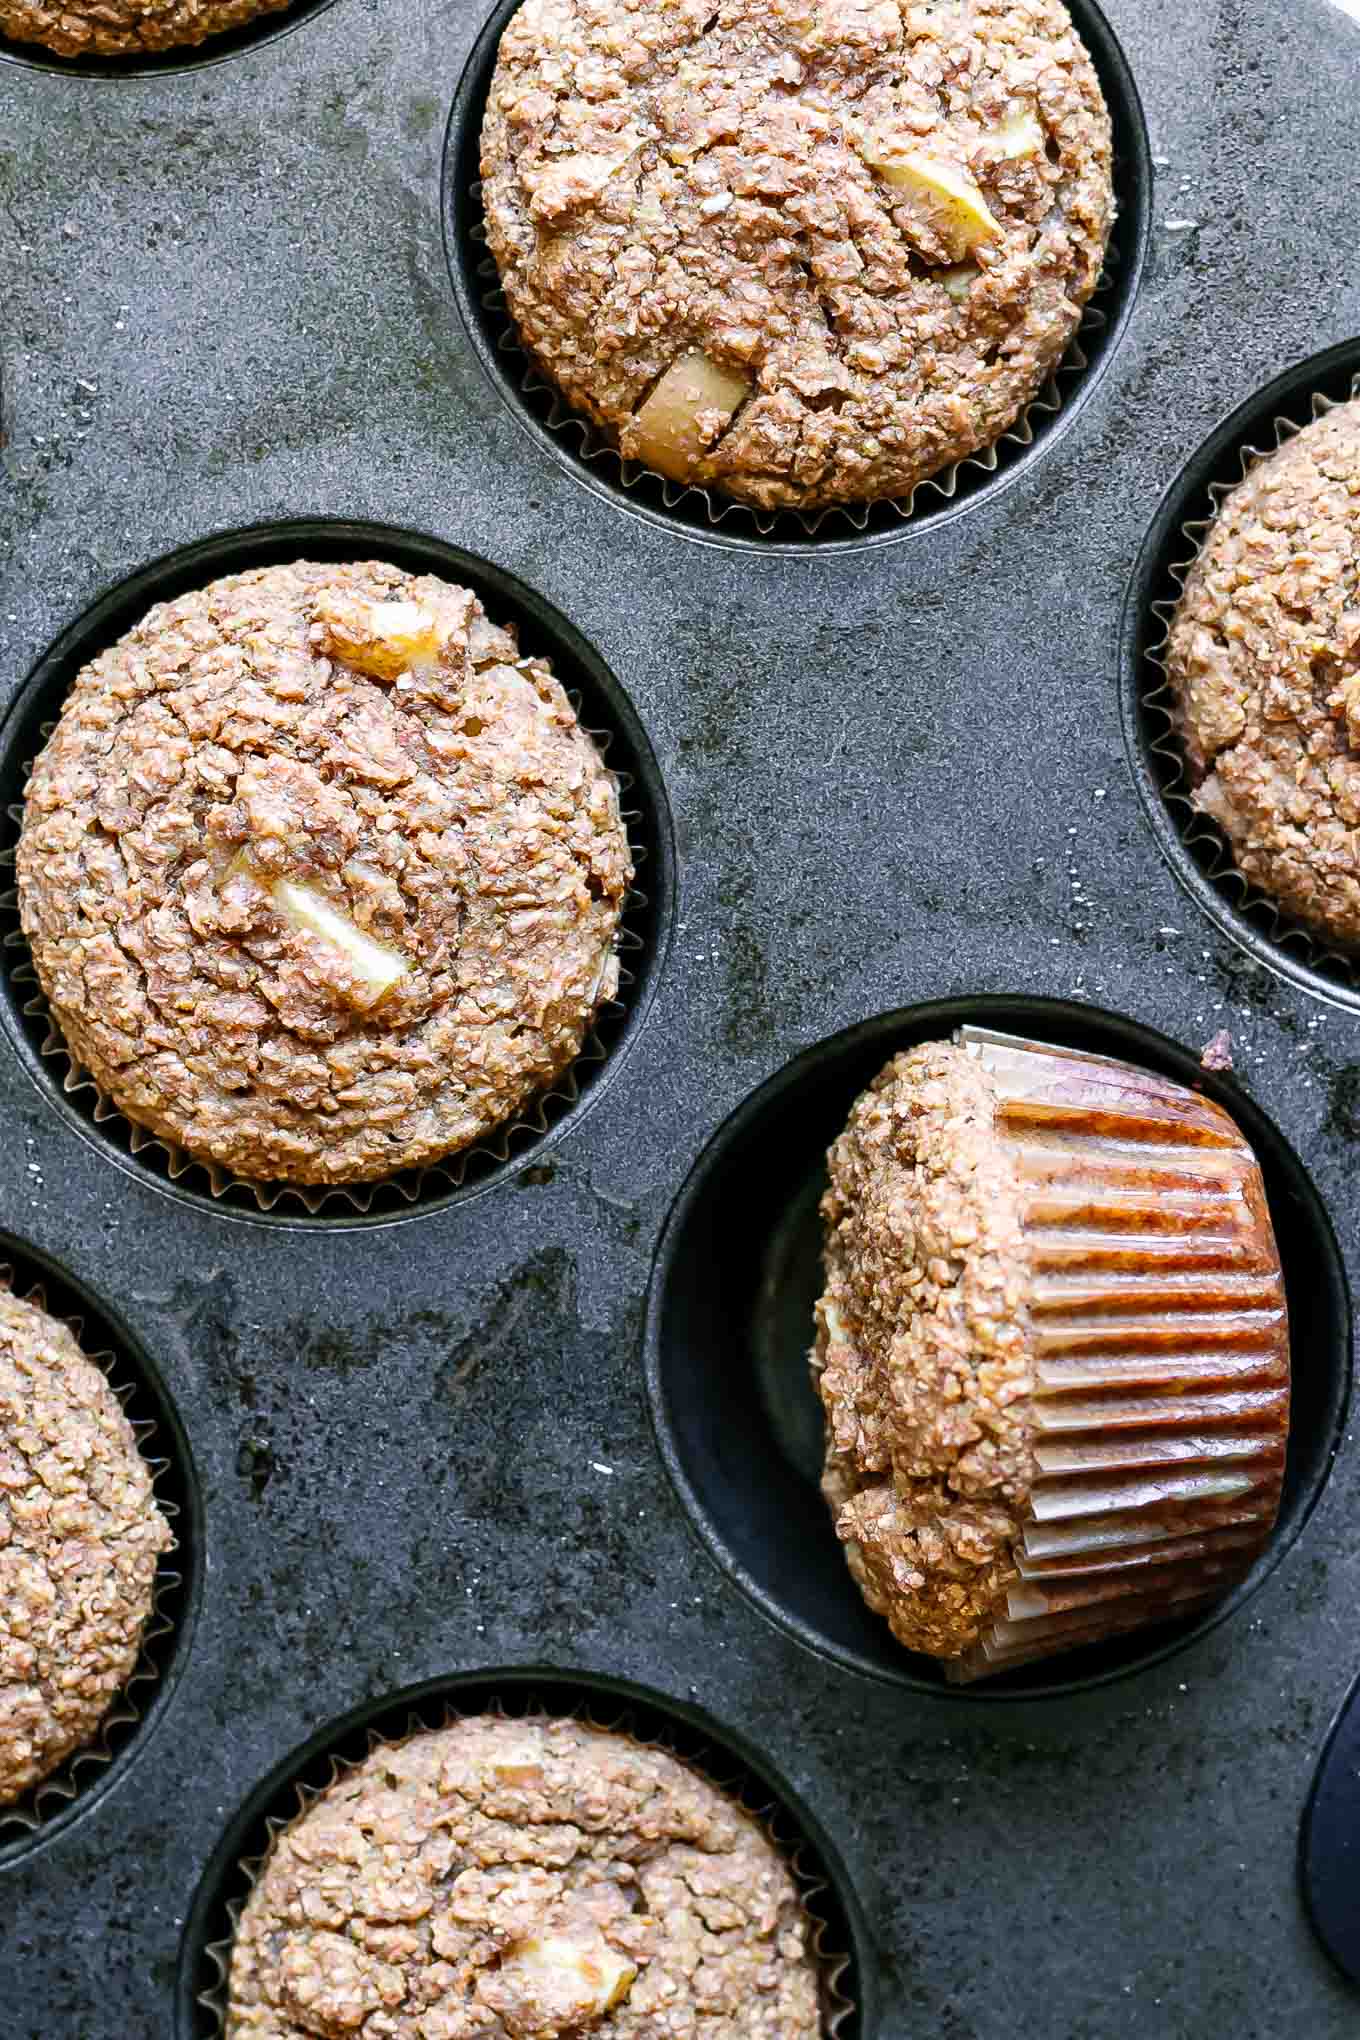 bran muffins with apples in a muffin tin after baking